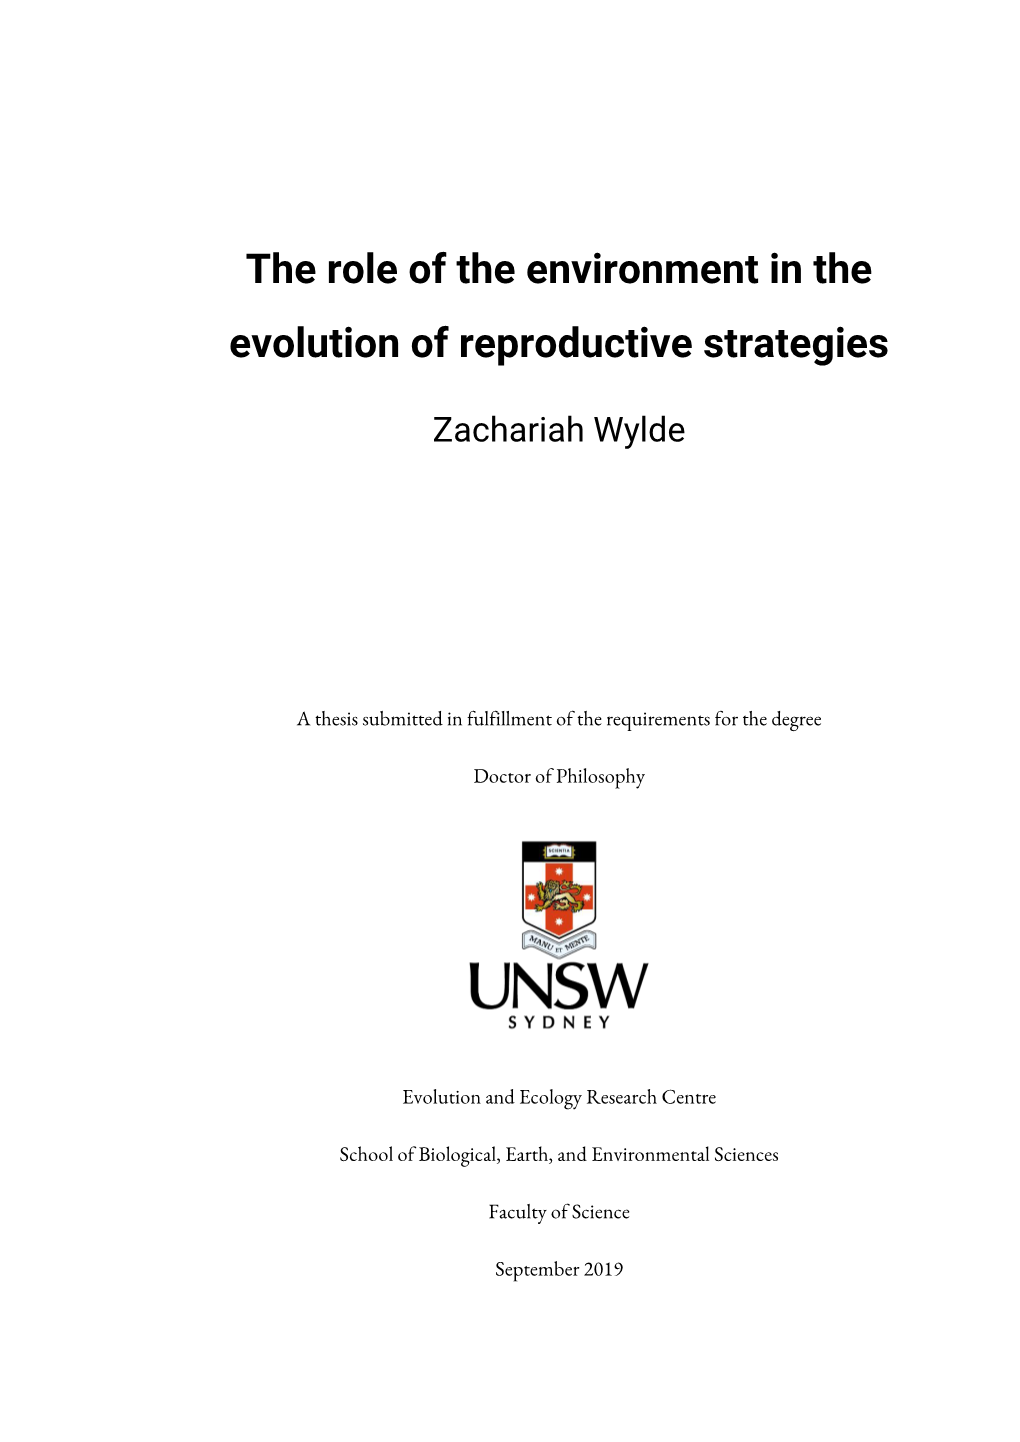 The Role of the Environment in the Evolution of Reproductive Strategies